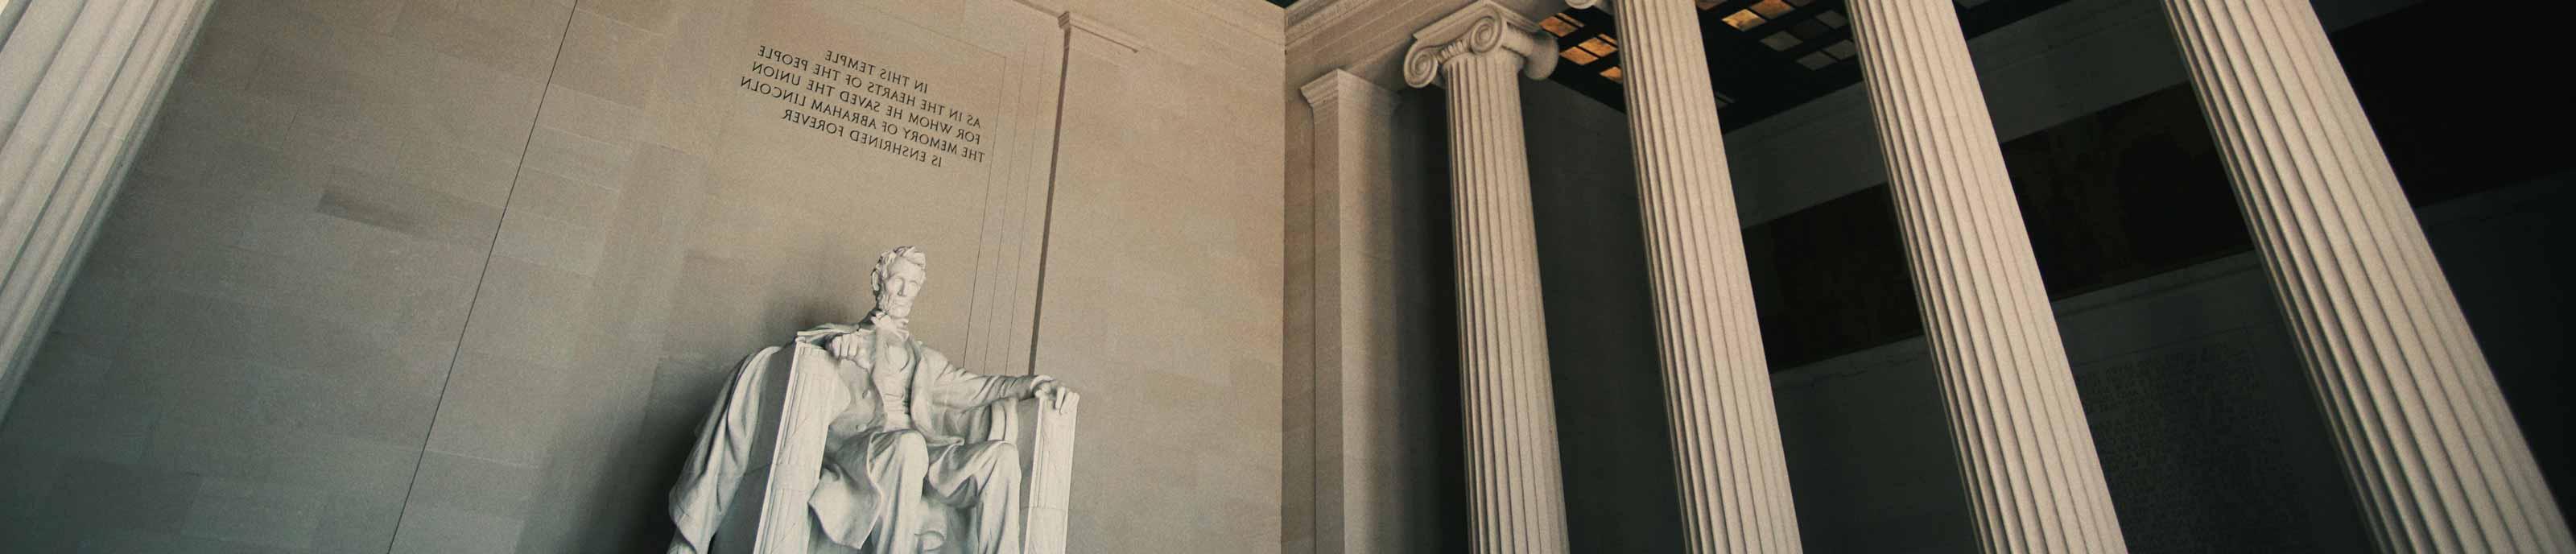 The statue of Abraham Lincoln in the Lincoln Memorial in Washington, DC